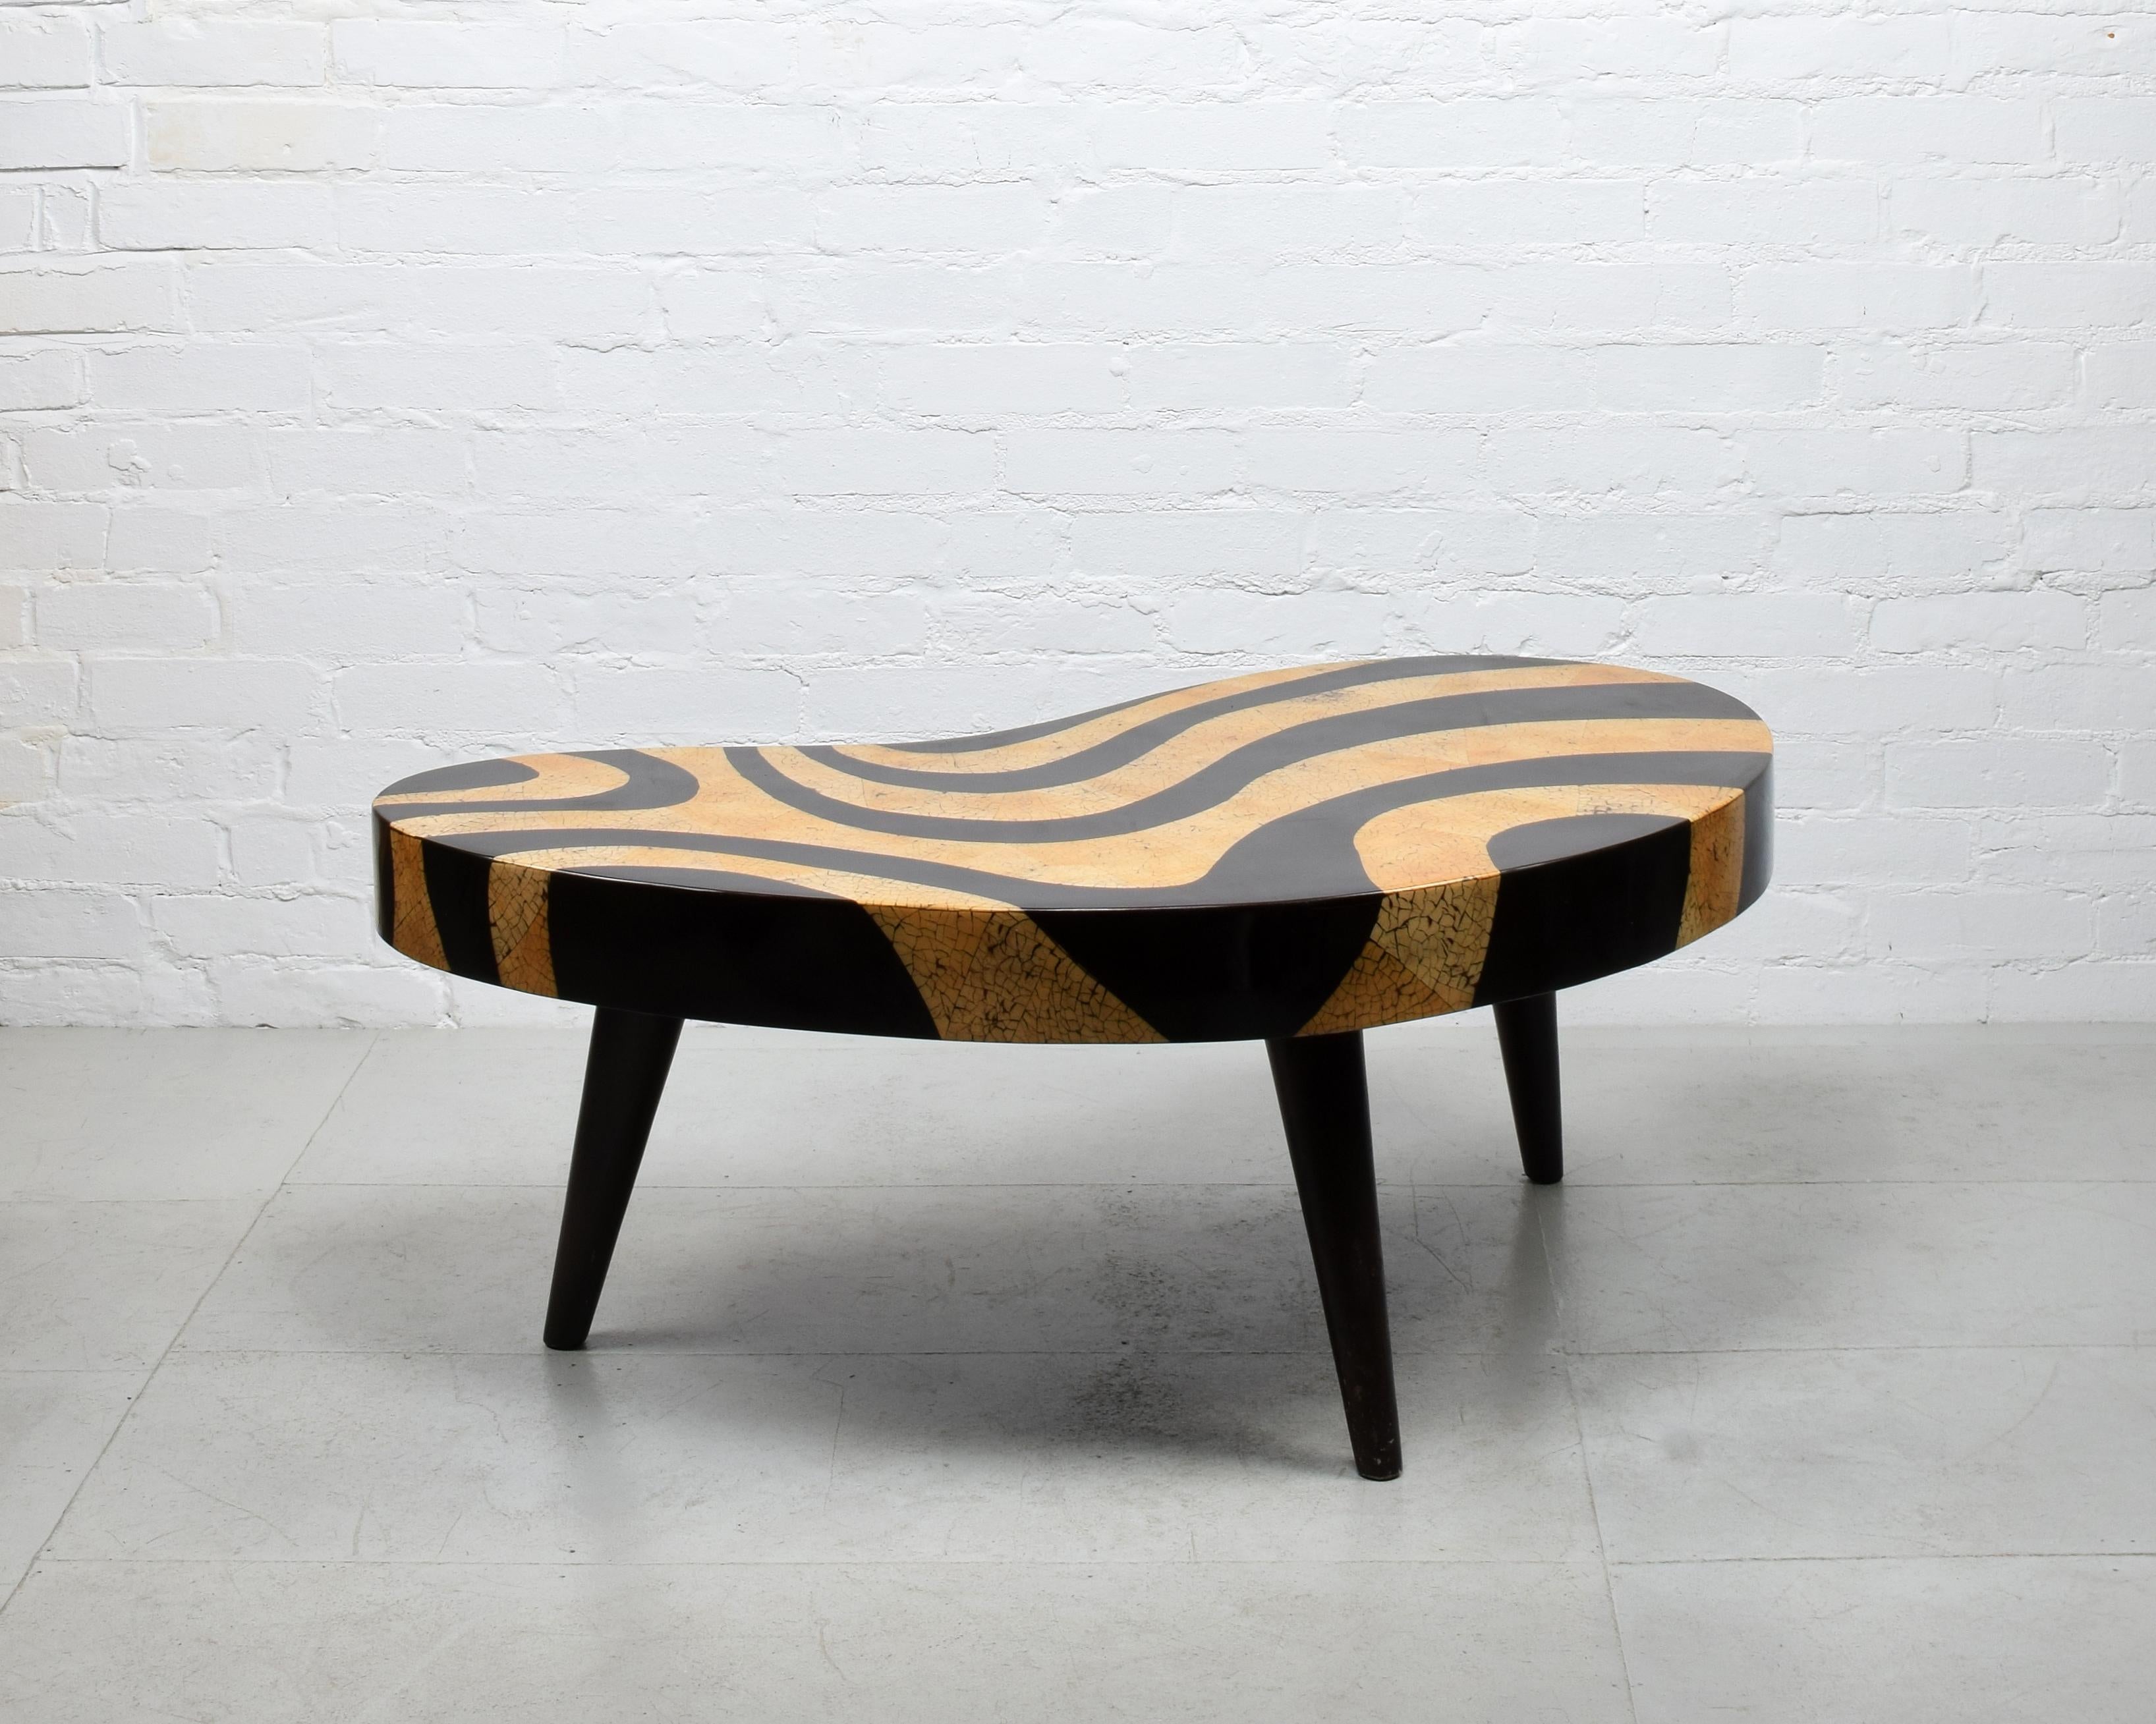 Biomorphic kidney-shaped coffee table, Mid-century style, c. 1980s

Zebra/tiger faux eggshell lacquer mosaic and inlaid wood pattern print finish on composite top, wooden legs

A truly striking and unusual but usable item, in good condition with